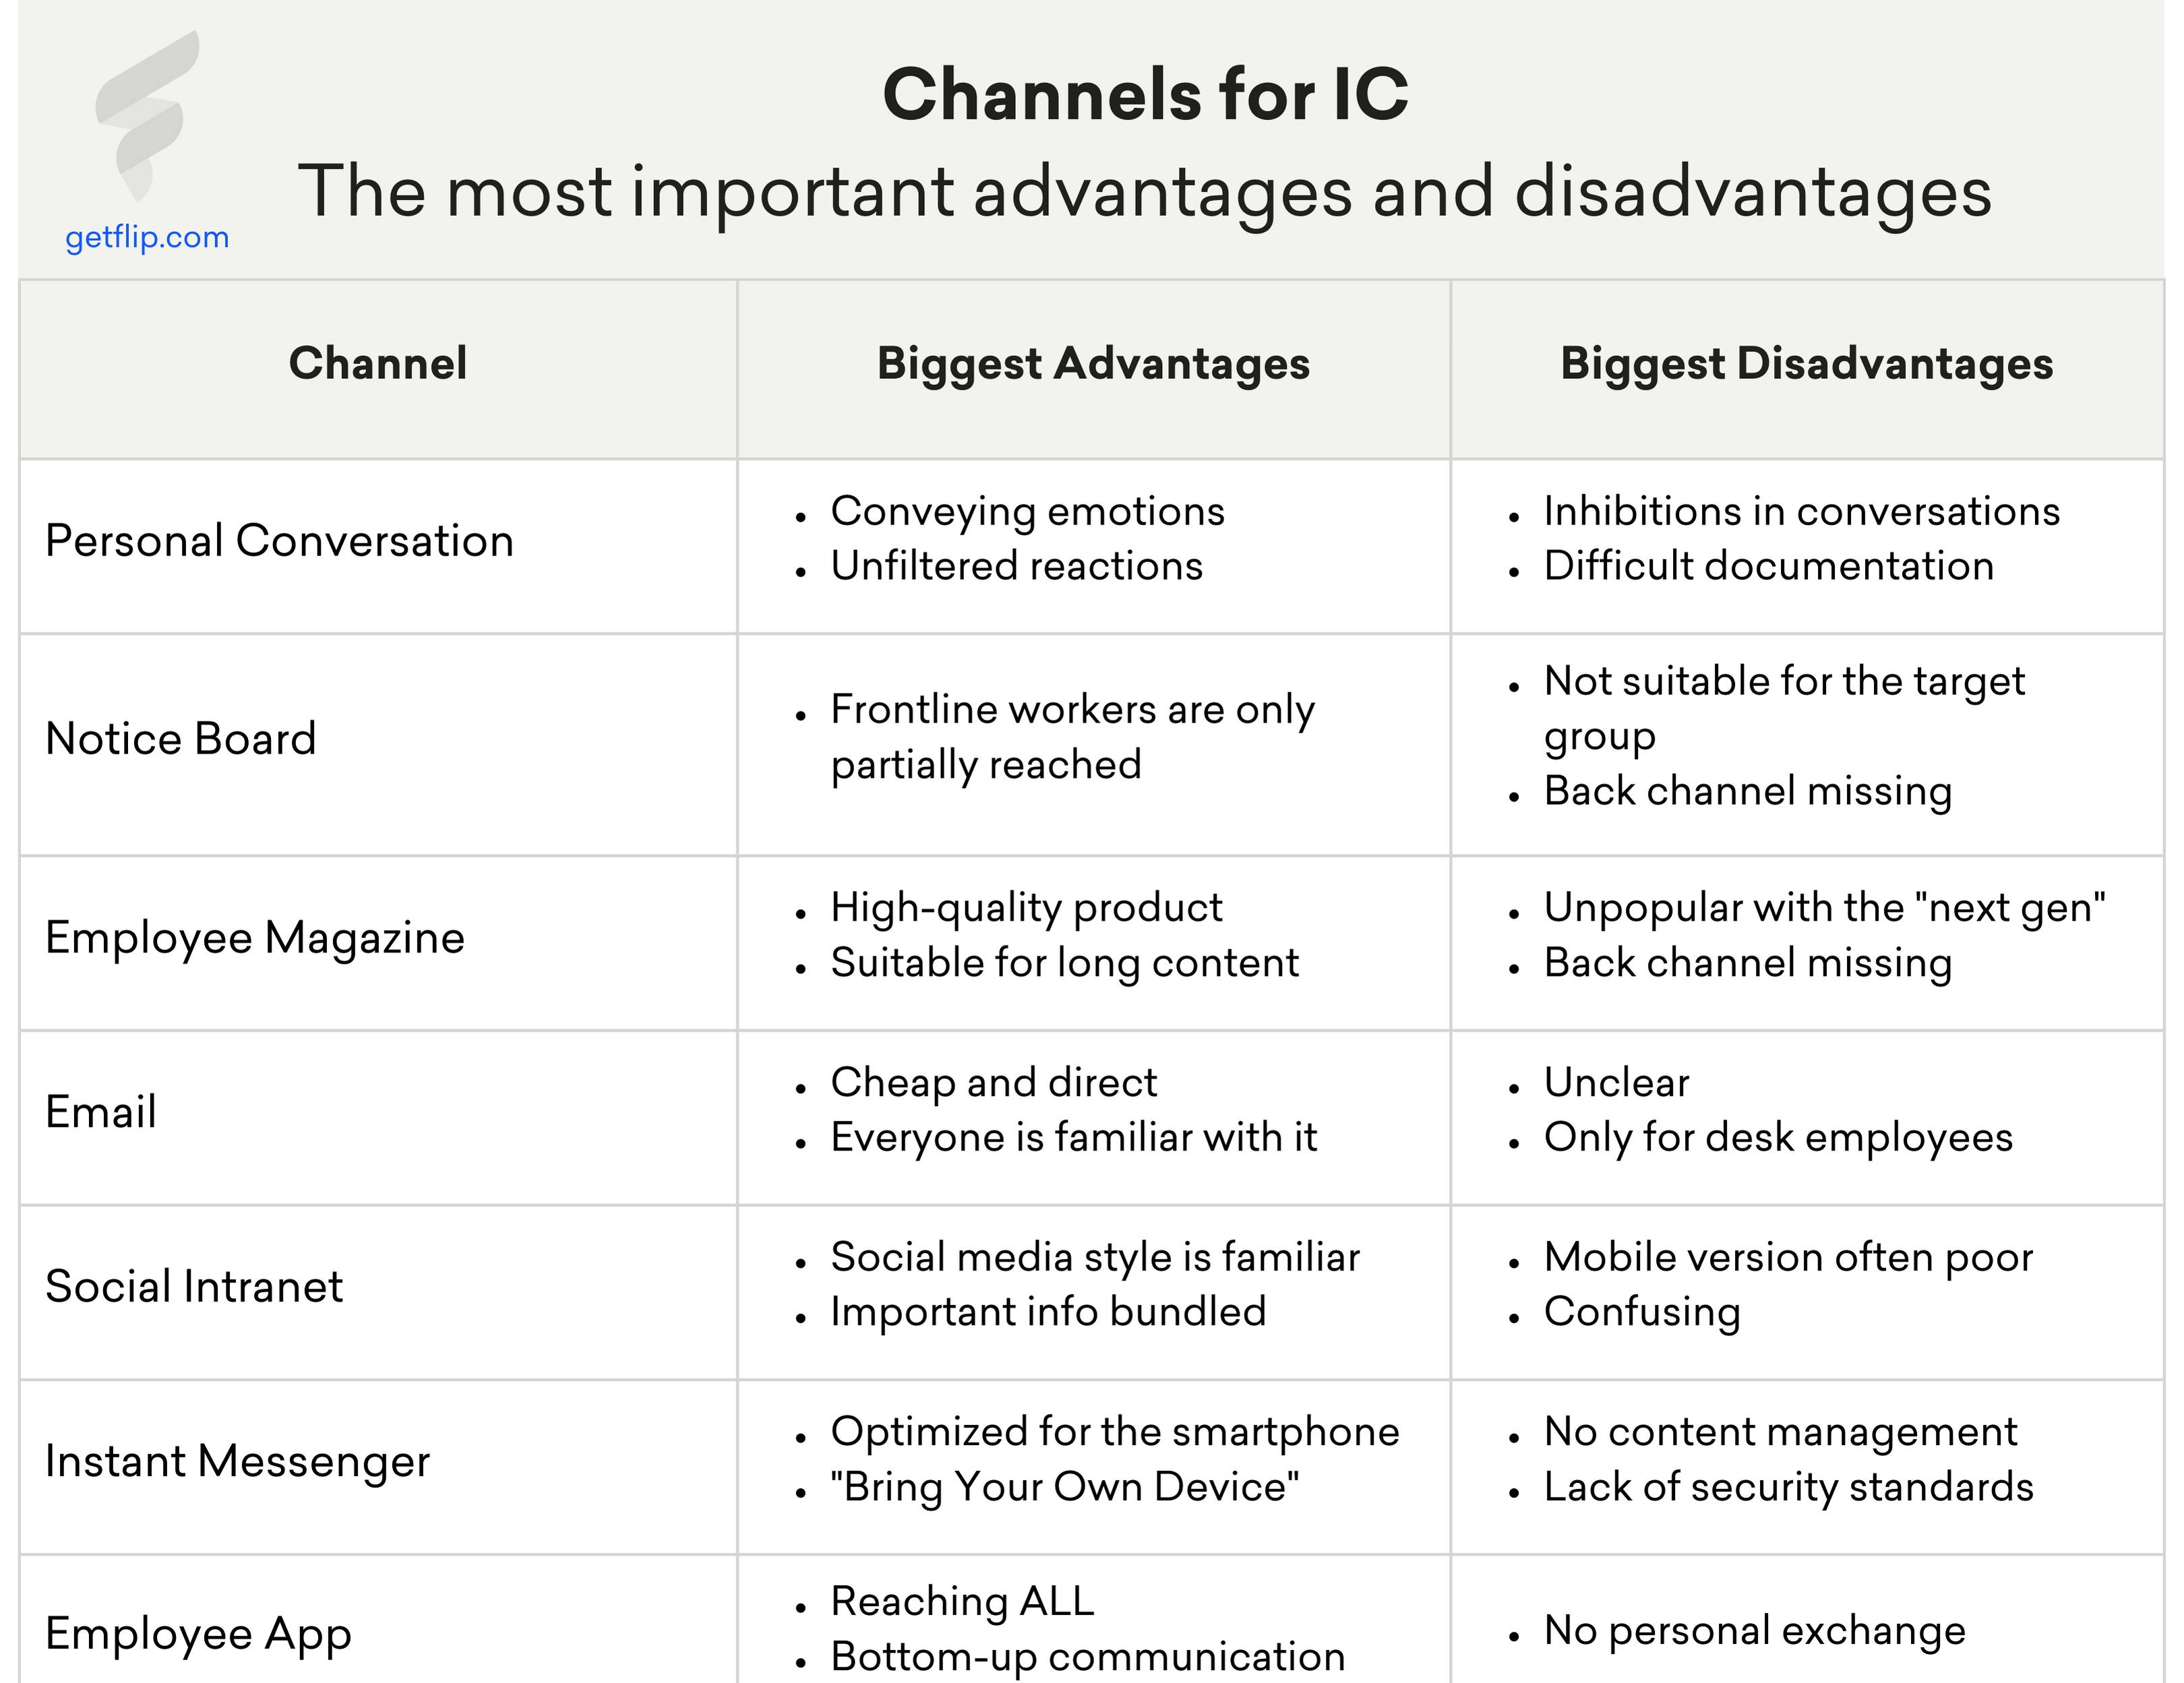 Statistic for channels about internal communication